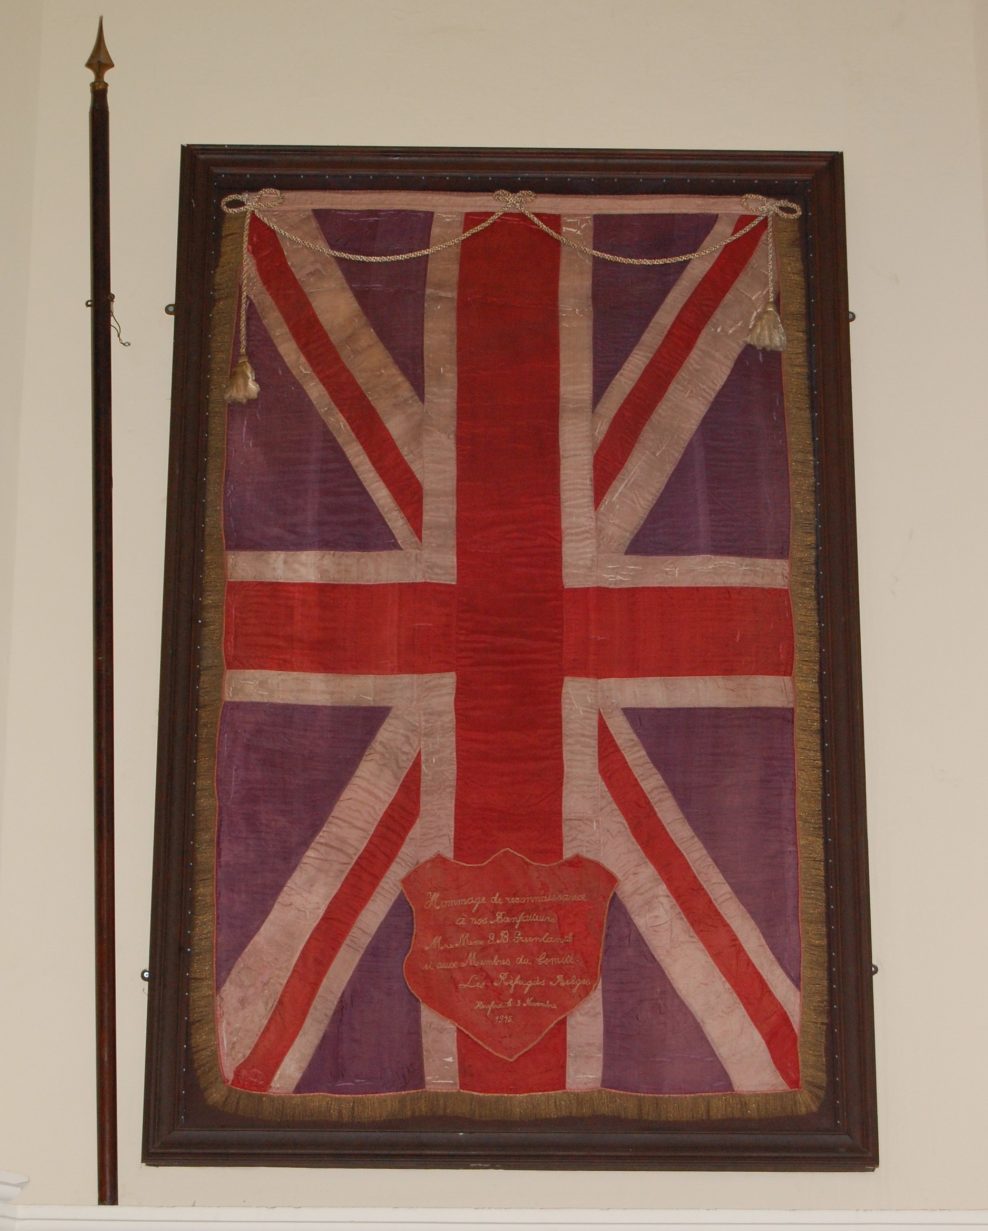 Flag made by Belgian refugees welcomed by Hereford in 1914